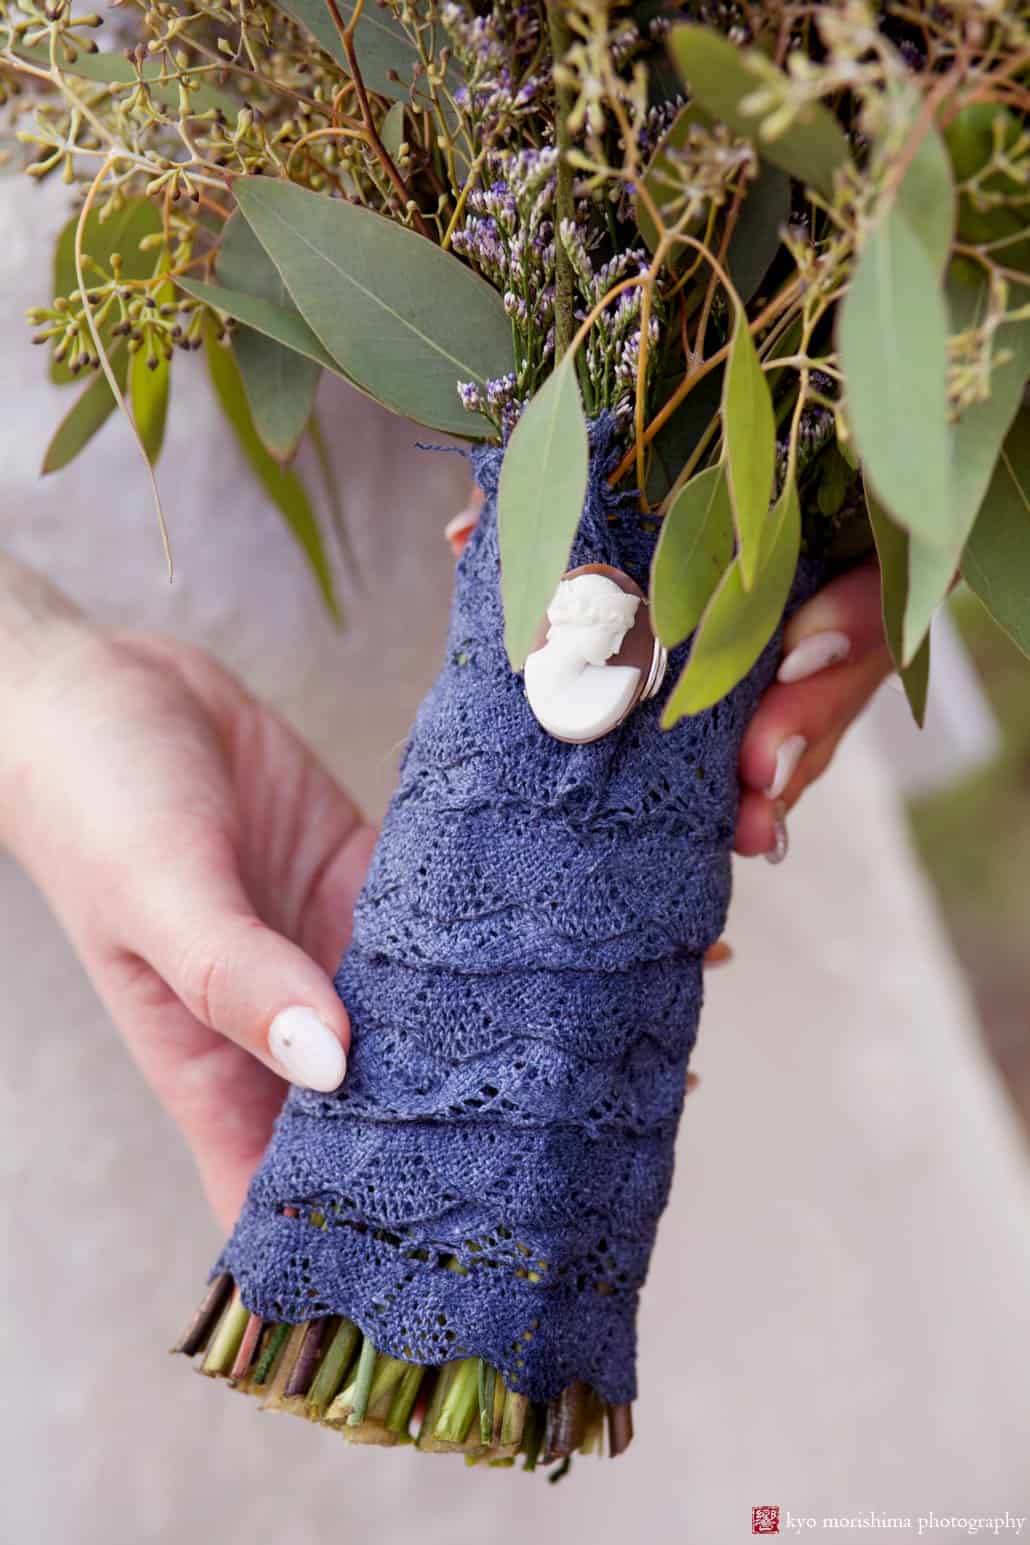 Detail of wedding bouquet stems wrapped in navy blue lace with cameo, photographed by Kyo Morishima